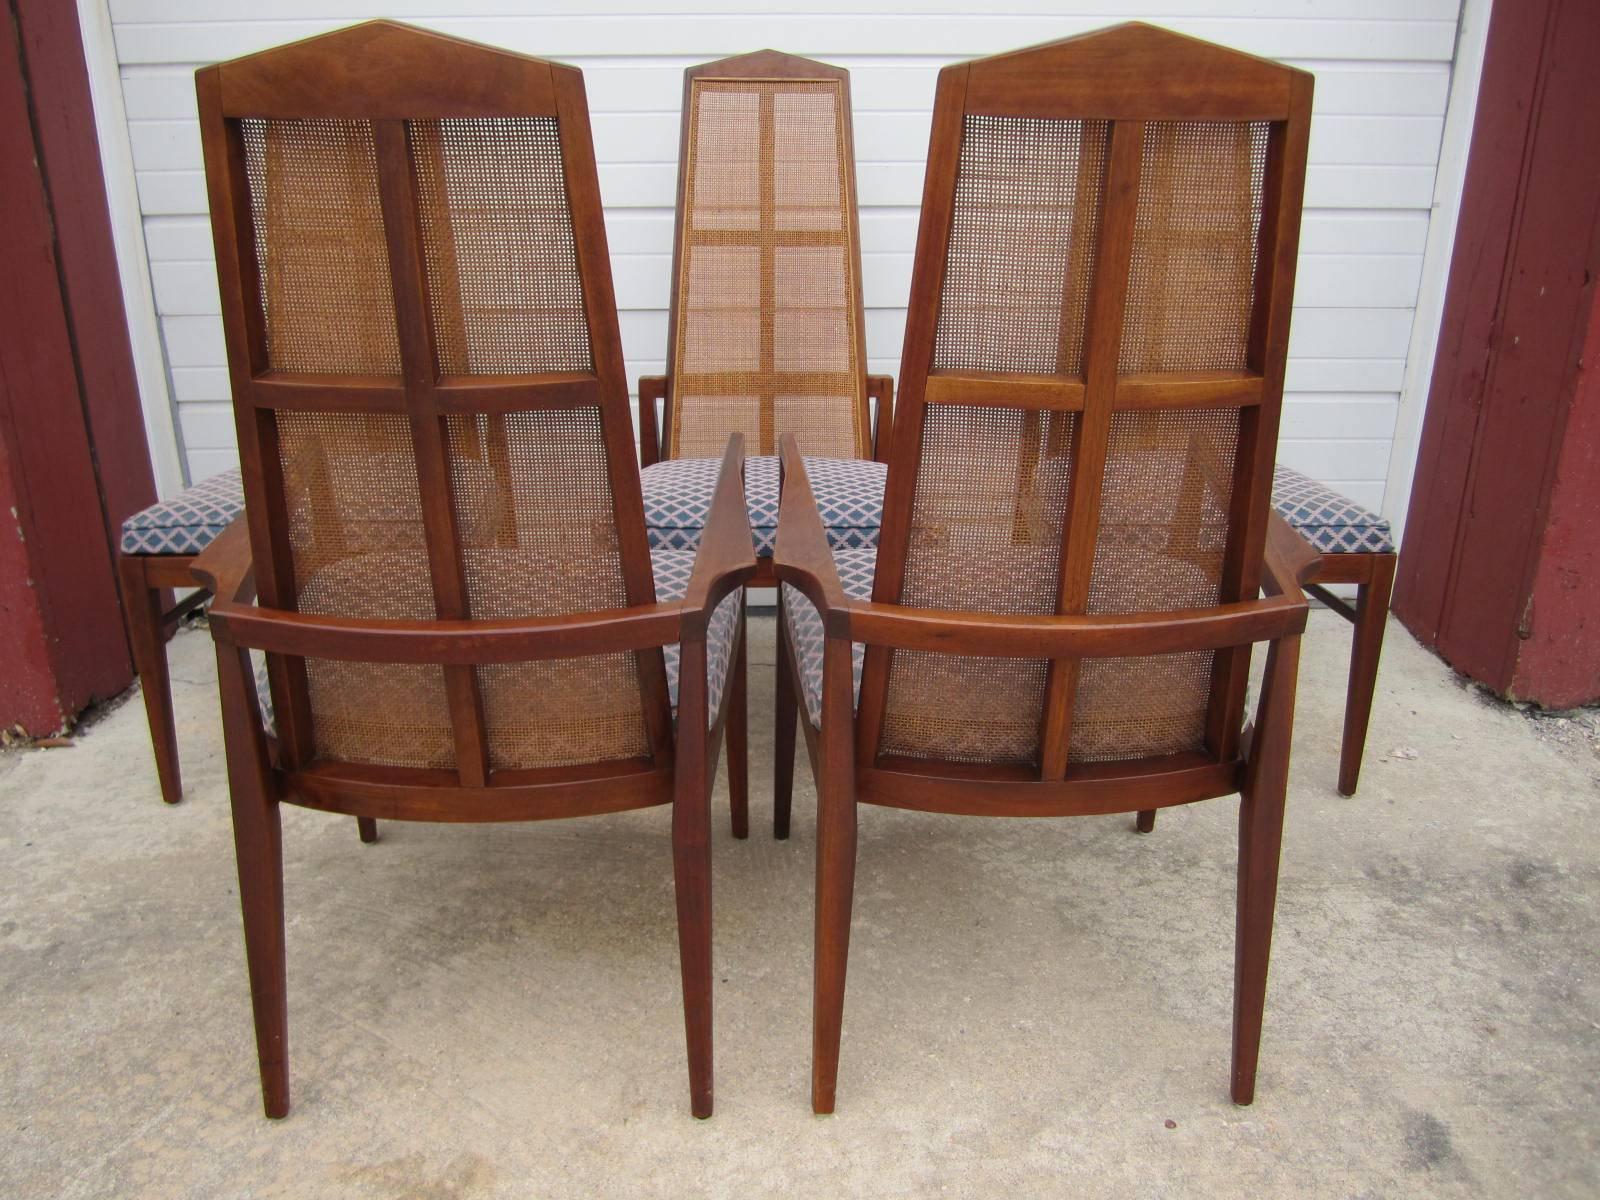 Mid Century Modern Walnut Dining Set by Foster McDavid. Founded in 1950 in Tampa, Florida- Foster McDavid's designs exude the stylings of the mad men era. These chairs look great with their original Probber style octagon dining table.  We love the